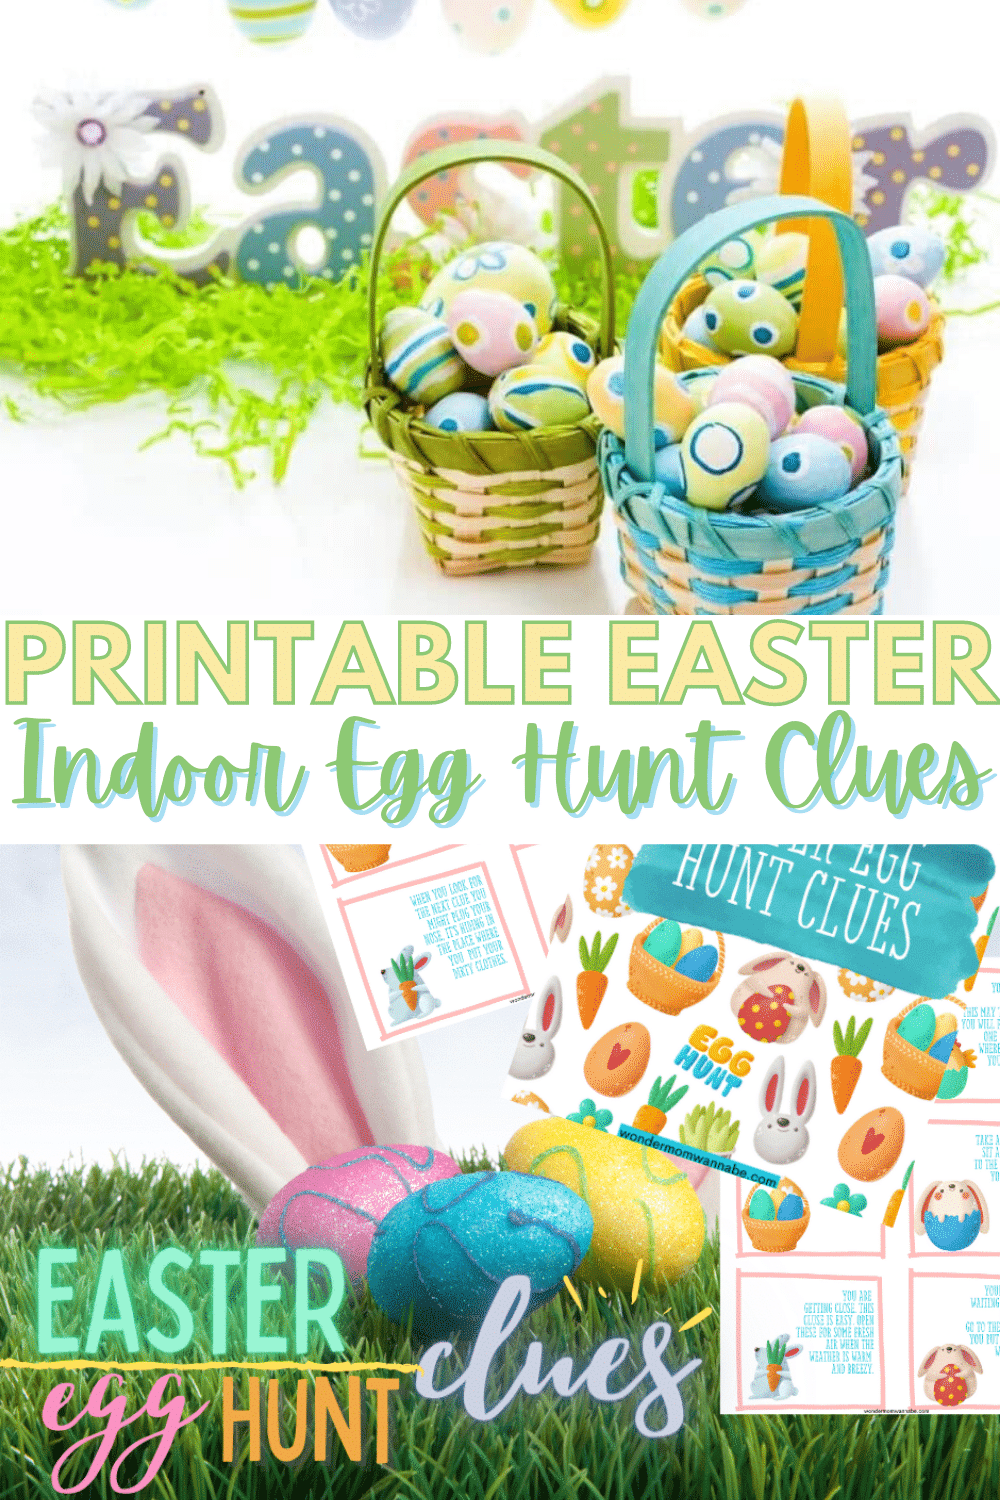 These free printable Indoor Easter Egg Hunt Clues make it easy to set up a fun scavenger hunt for eggs on Easter morning. #easter #easteregghunt #scavengerhunt #indooreasteregghunt via @wondermomwannab